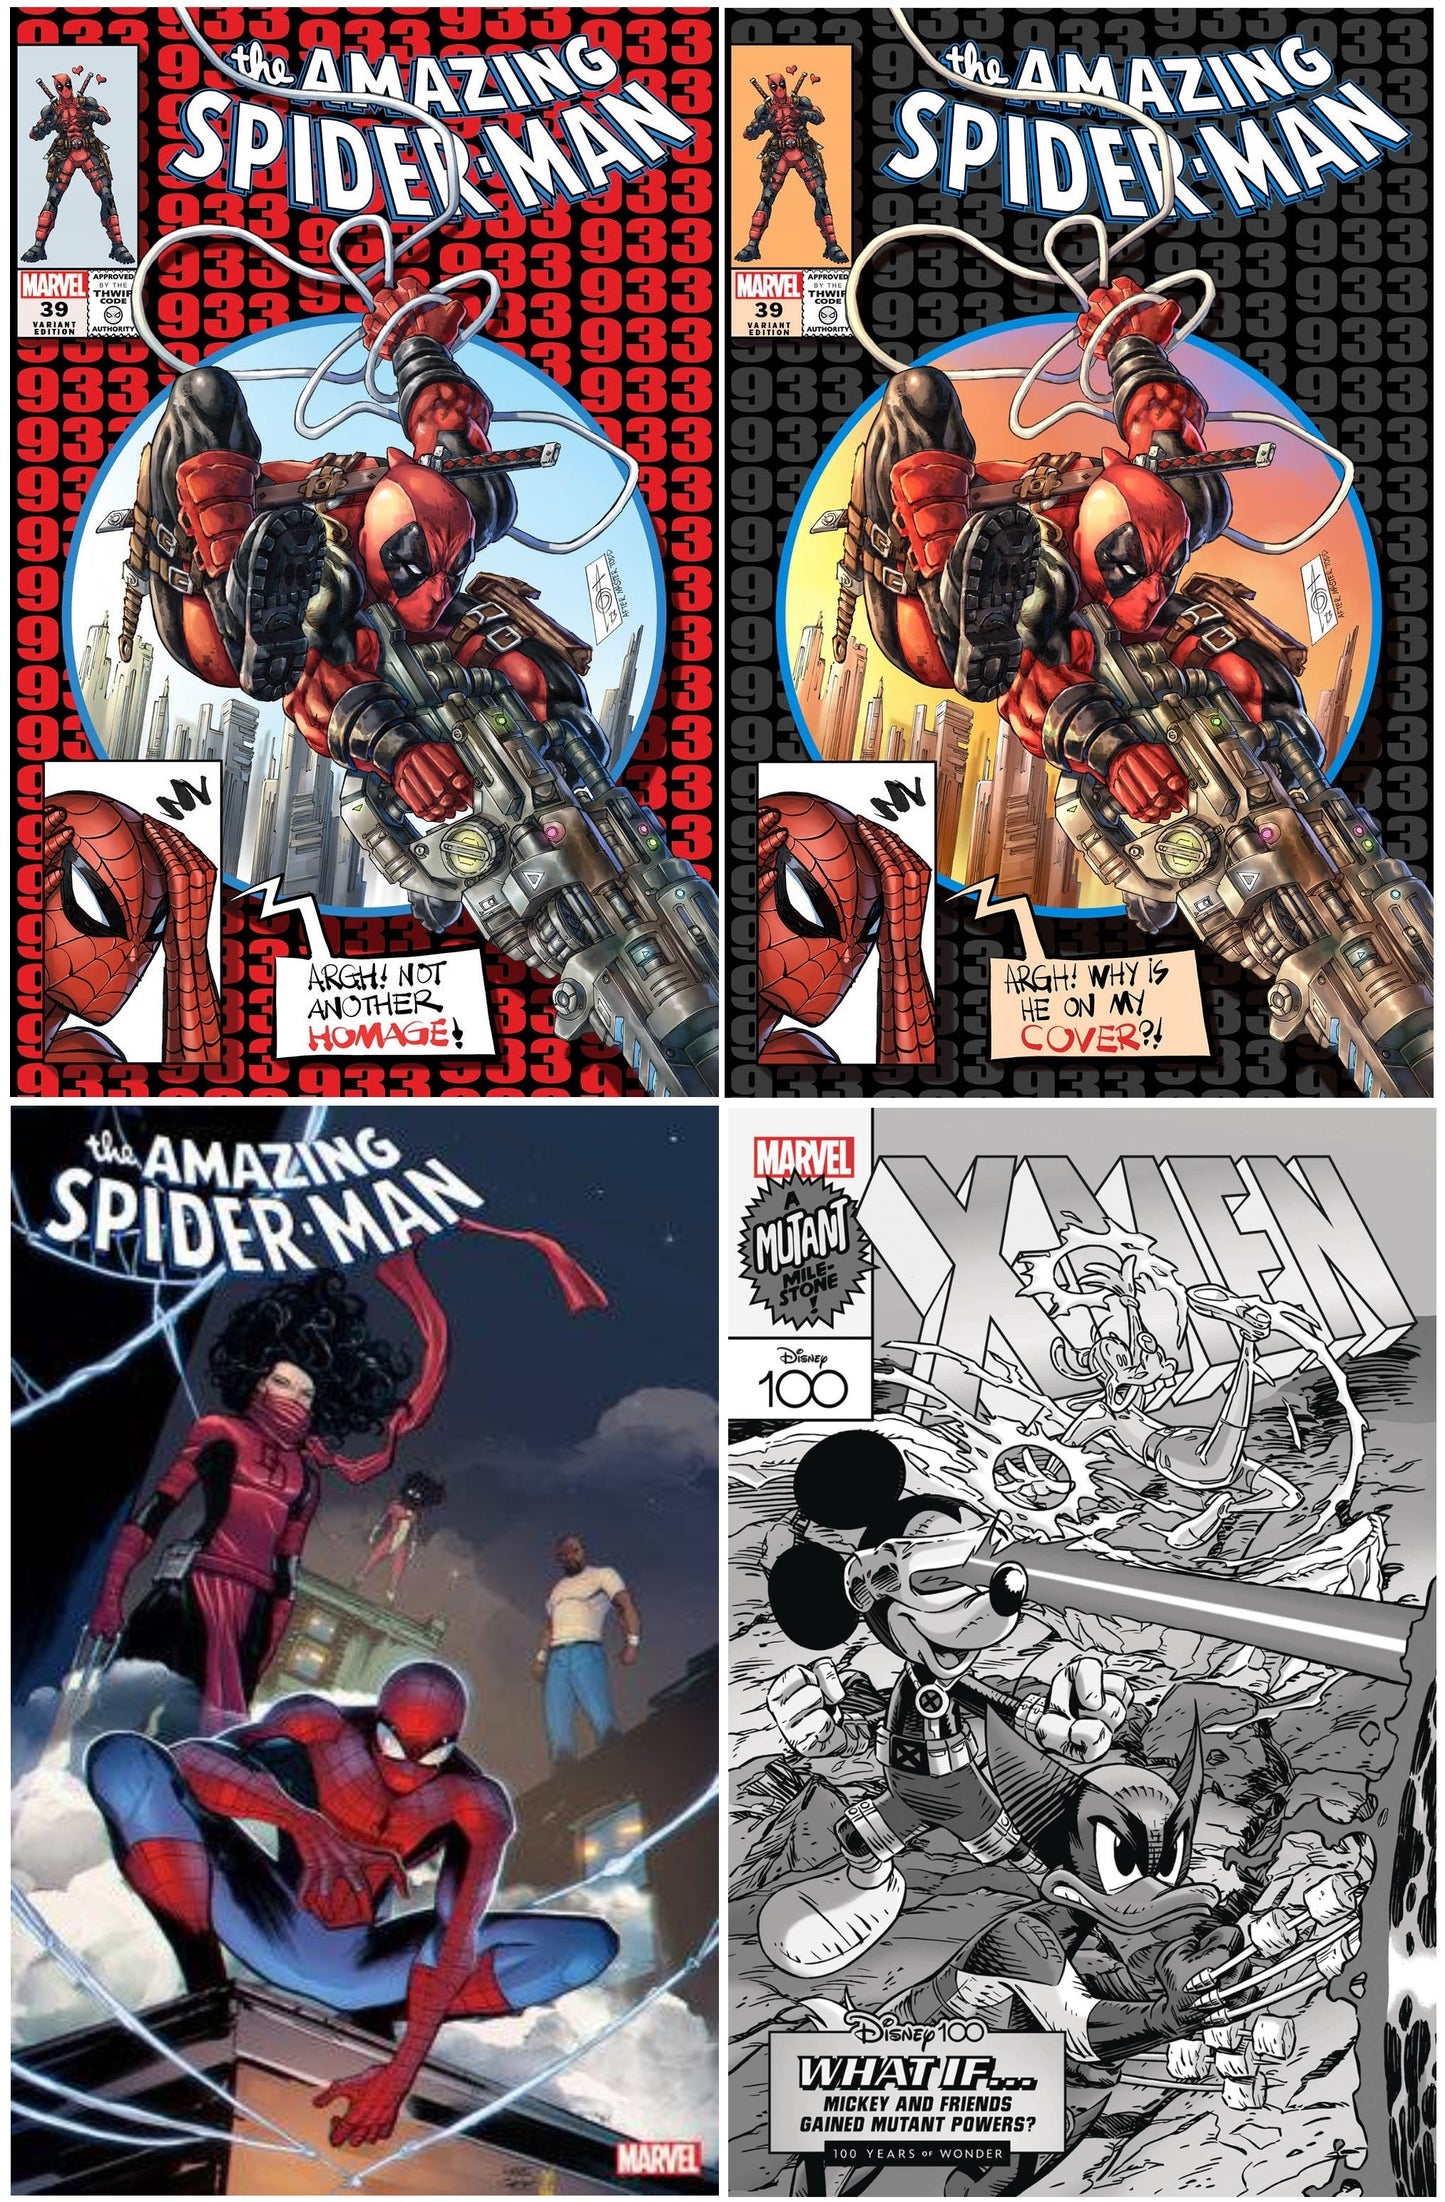 AMAZING SPIDER-MAN #39 ALAN QUAH RED/SILVER TRADE DRESS ANTI-HOMAGE VARIANT SET LIMITED TO 600 SETS WITH NUMBER COA + 1:25 & 1:100 VARIANT